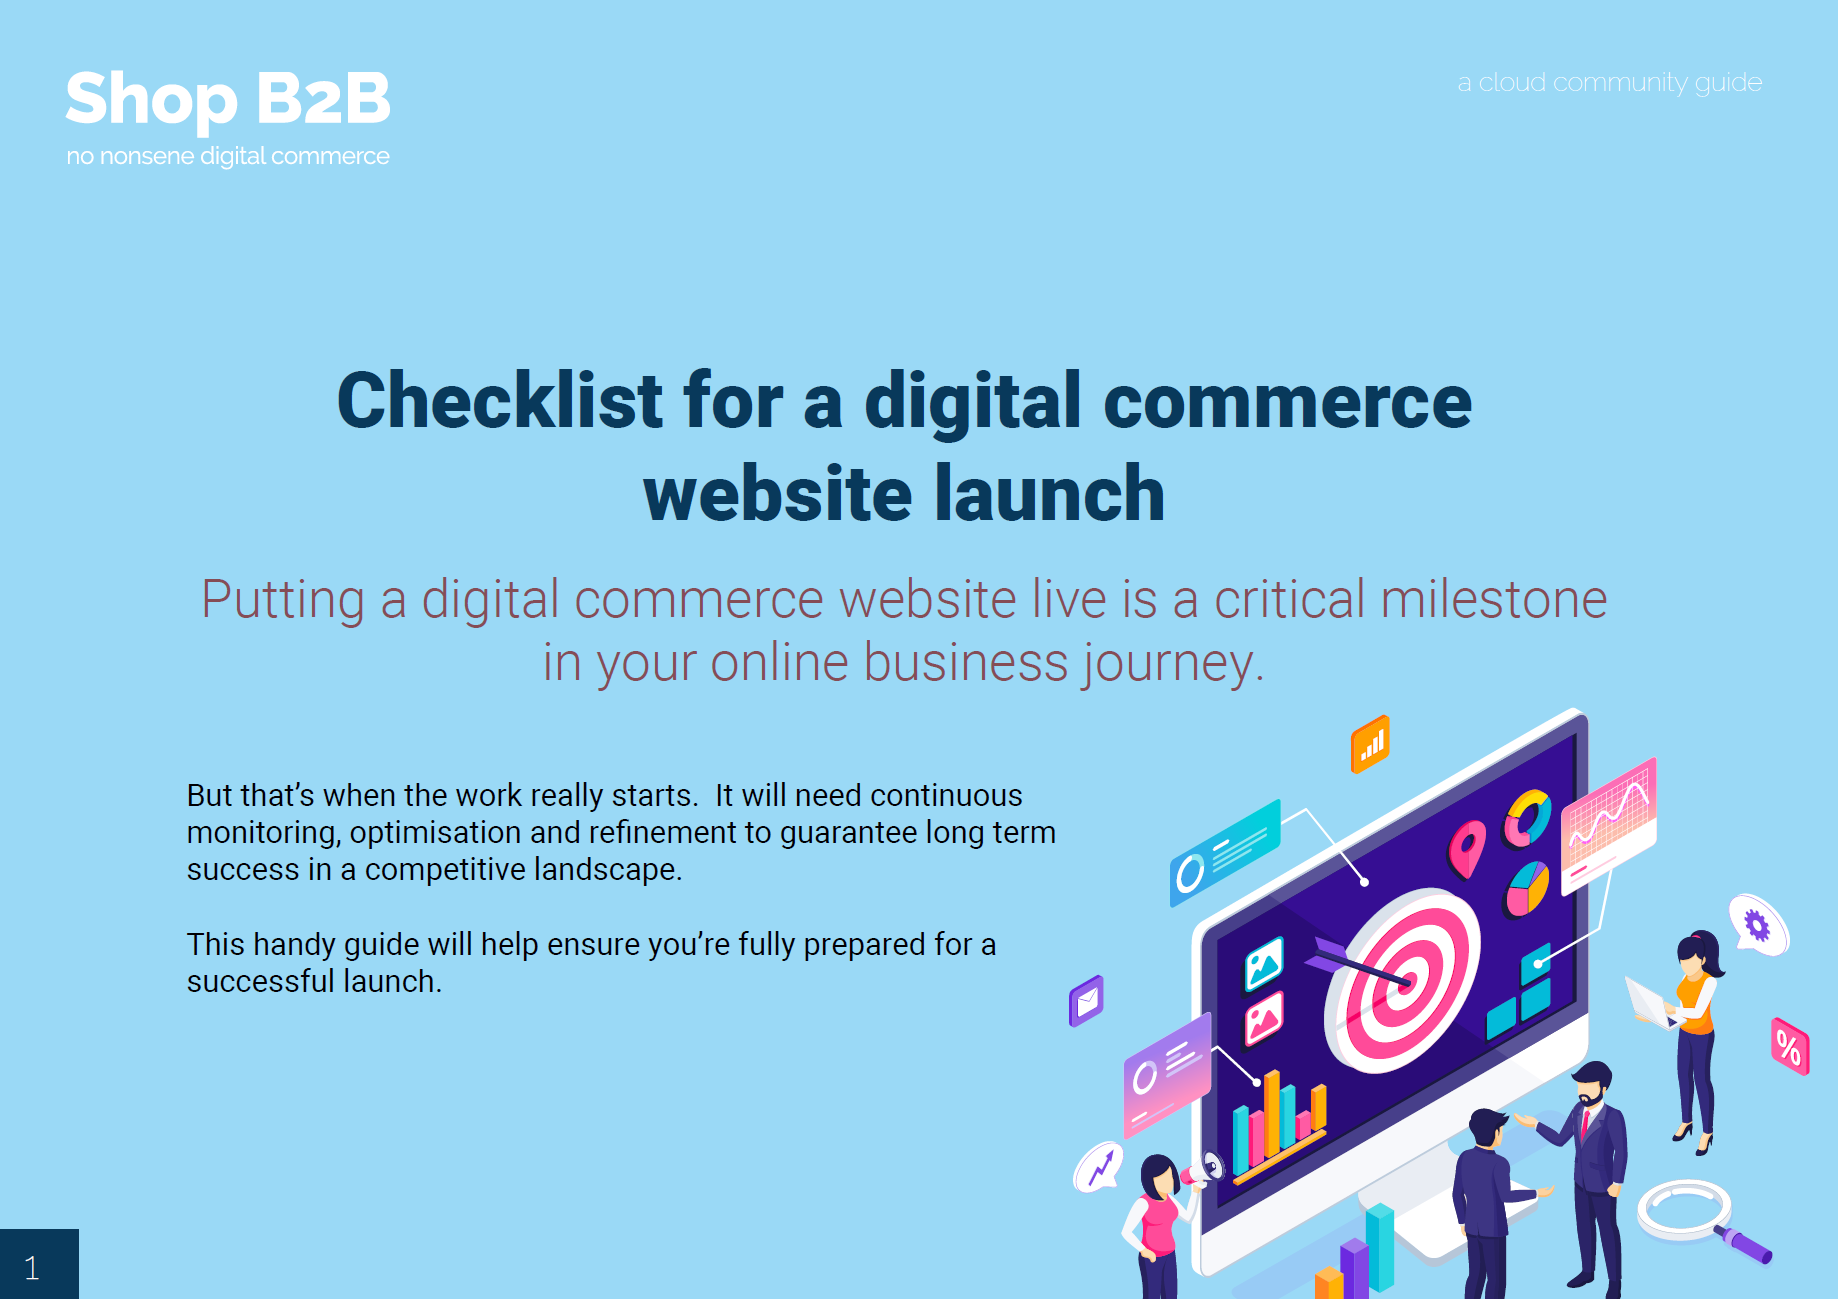 >Checklist for a digital commerce website launch